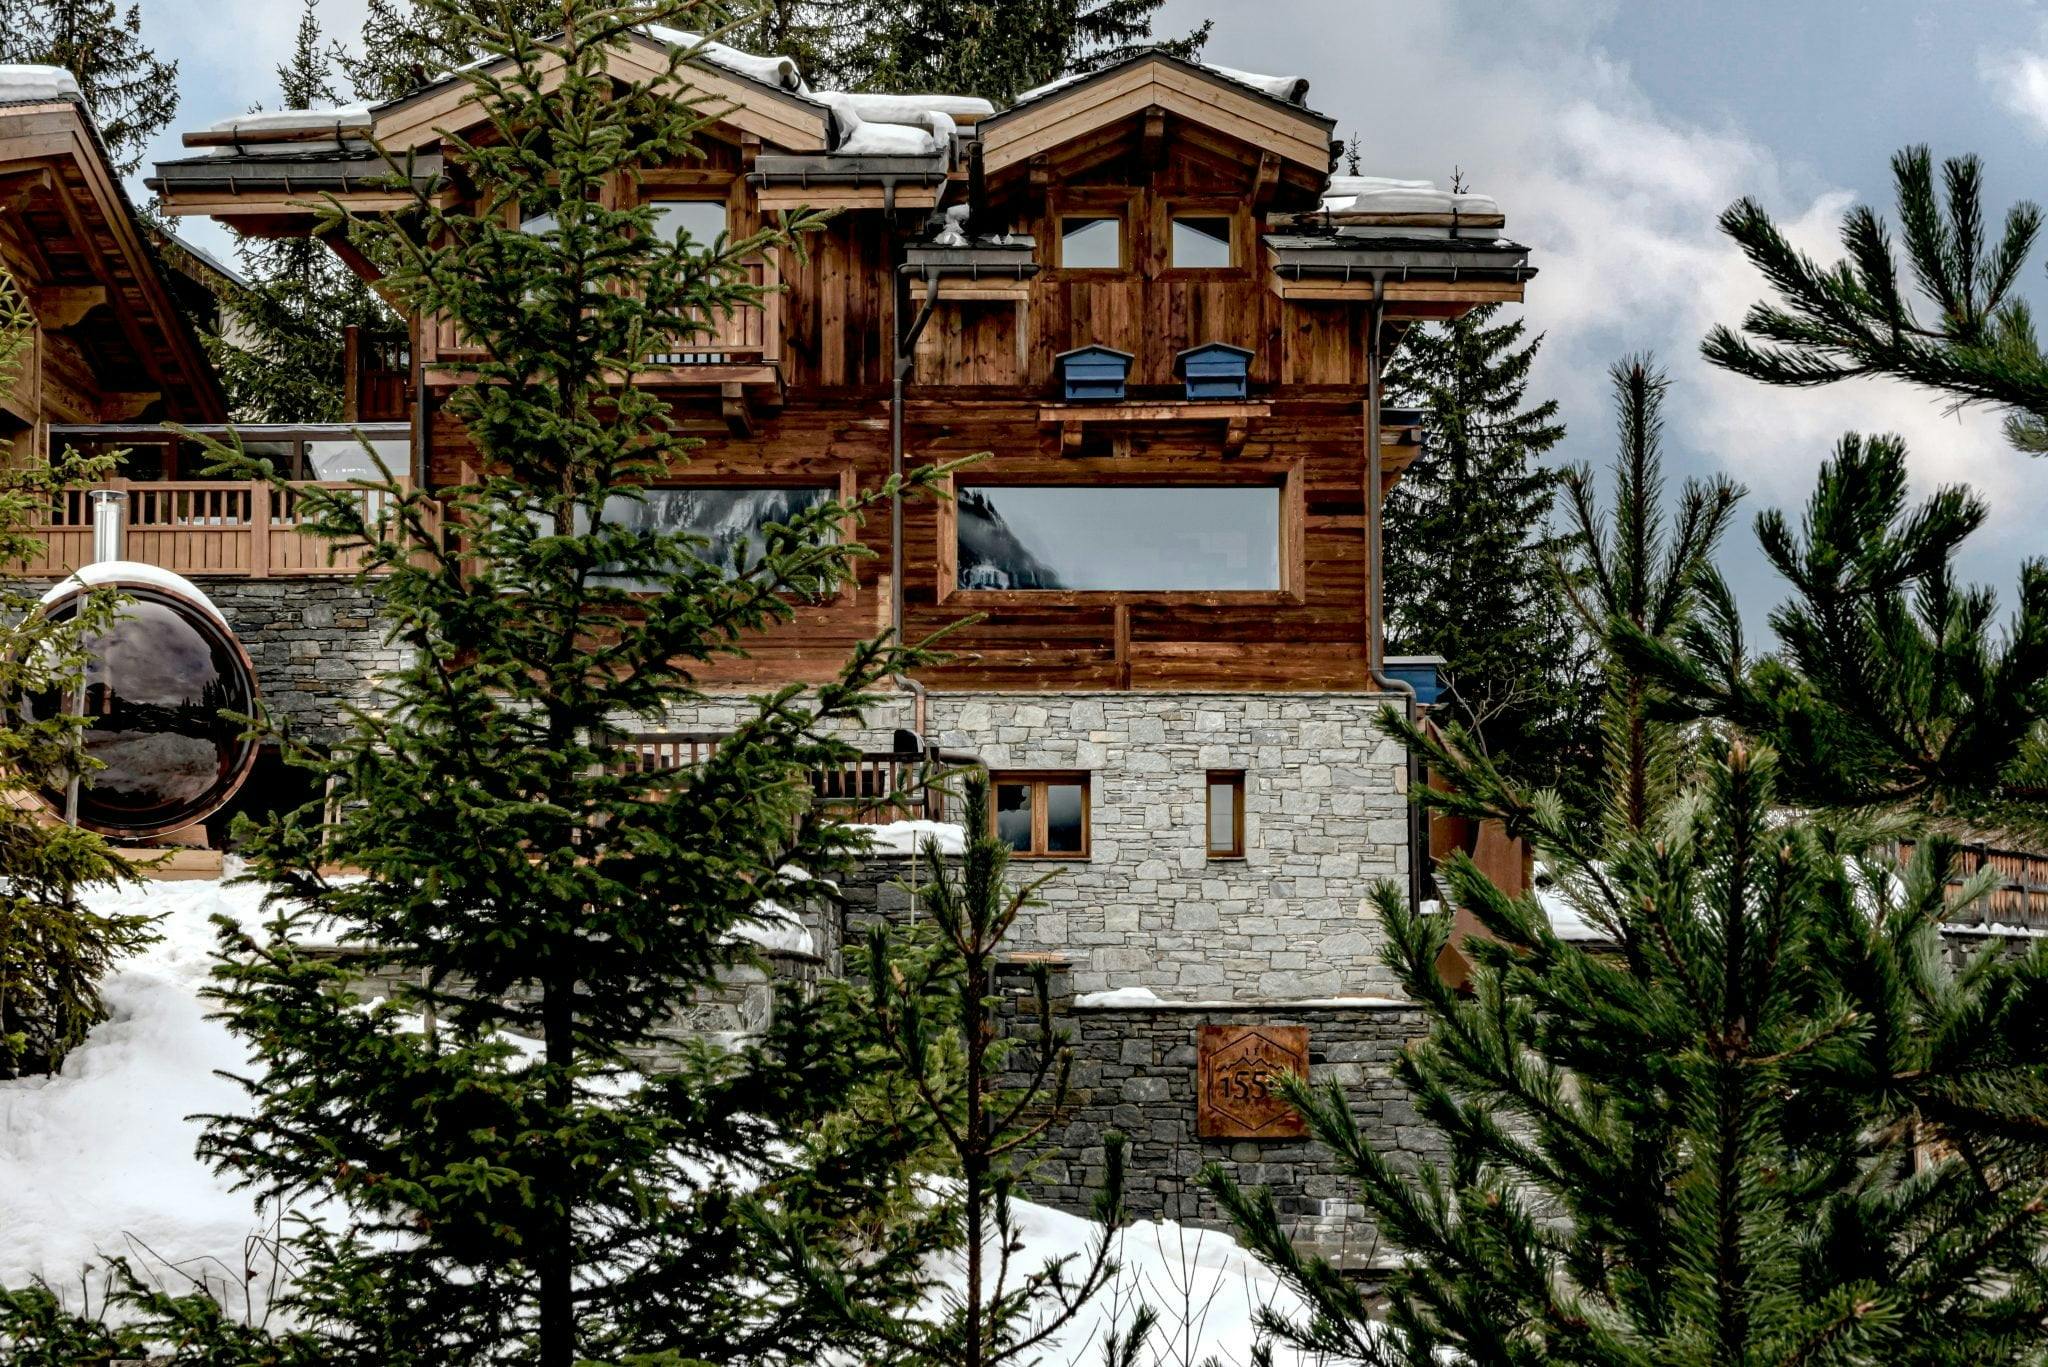 The 1550 chalet, view from the outside among fir trees